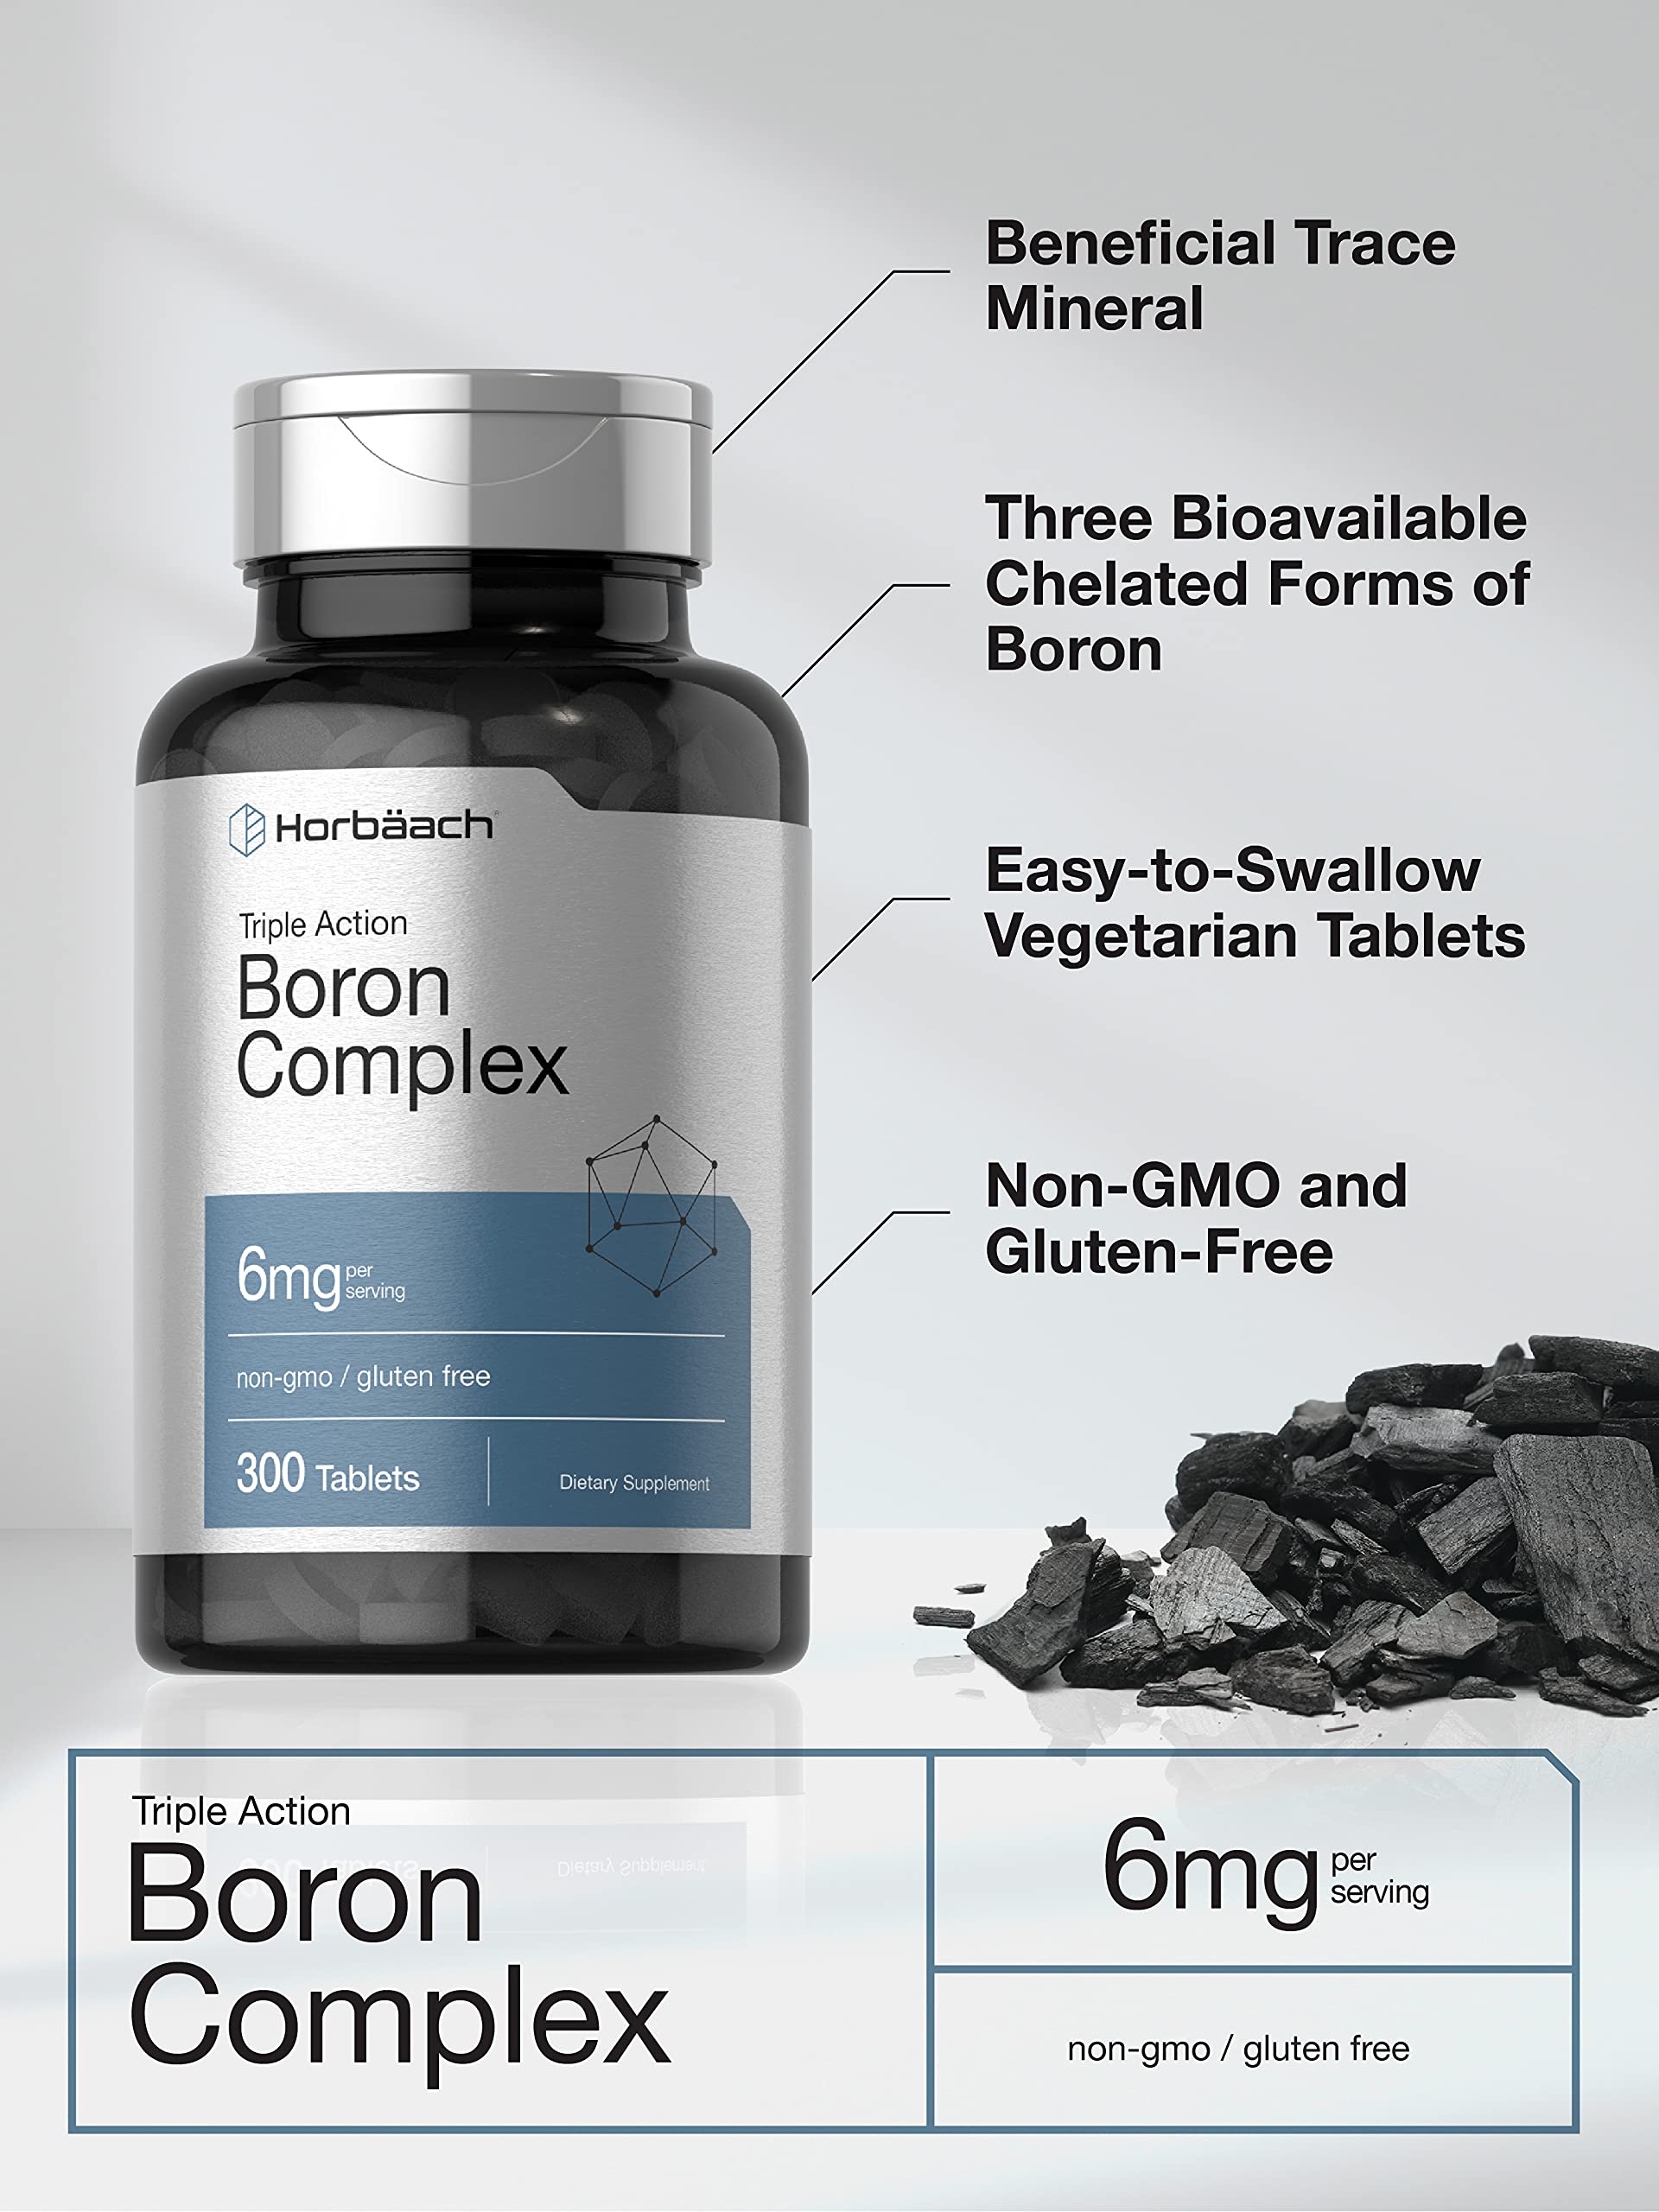 Boron Supplement 6mg | 300 Tablets | Triple Action Complex for Men and Women | Boron Citrate, Boron Glycinate, and Boron Asparate | Non-GMO and Gluten Free | by Horbaach